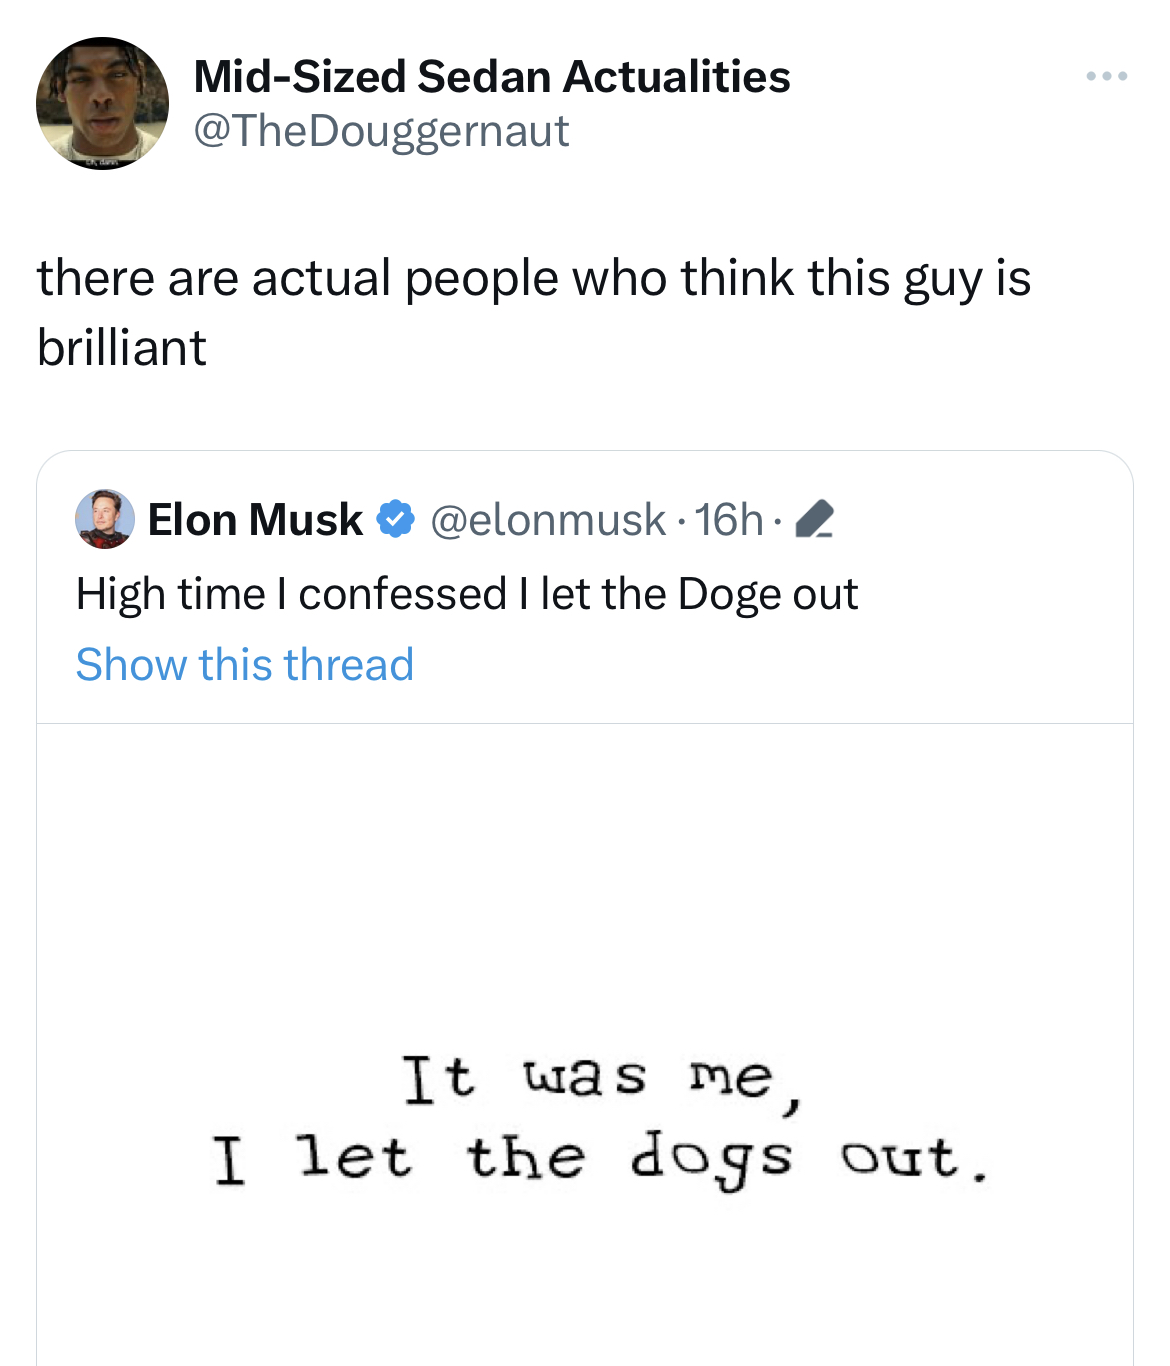 Tweets dunking on celebs - number - MidSized Sedan Actualities there are actual people who think this guy is brilliant Elon Musk 16h. High time I confessed I let the Doge out Show this thread It was me, I let the dogs out.